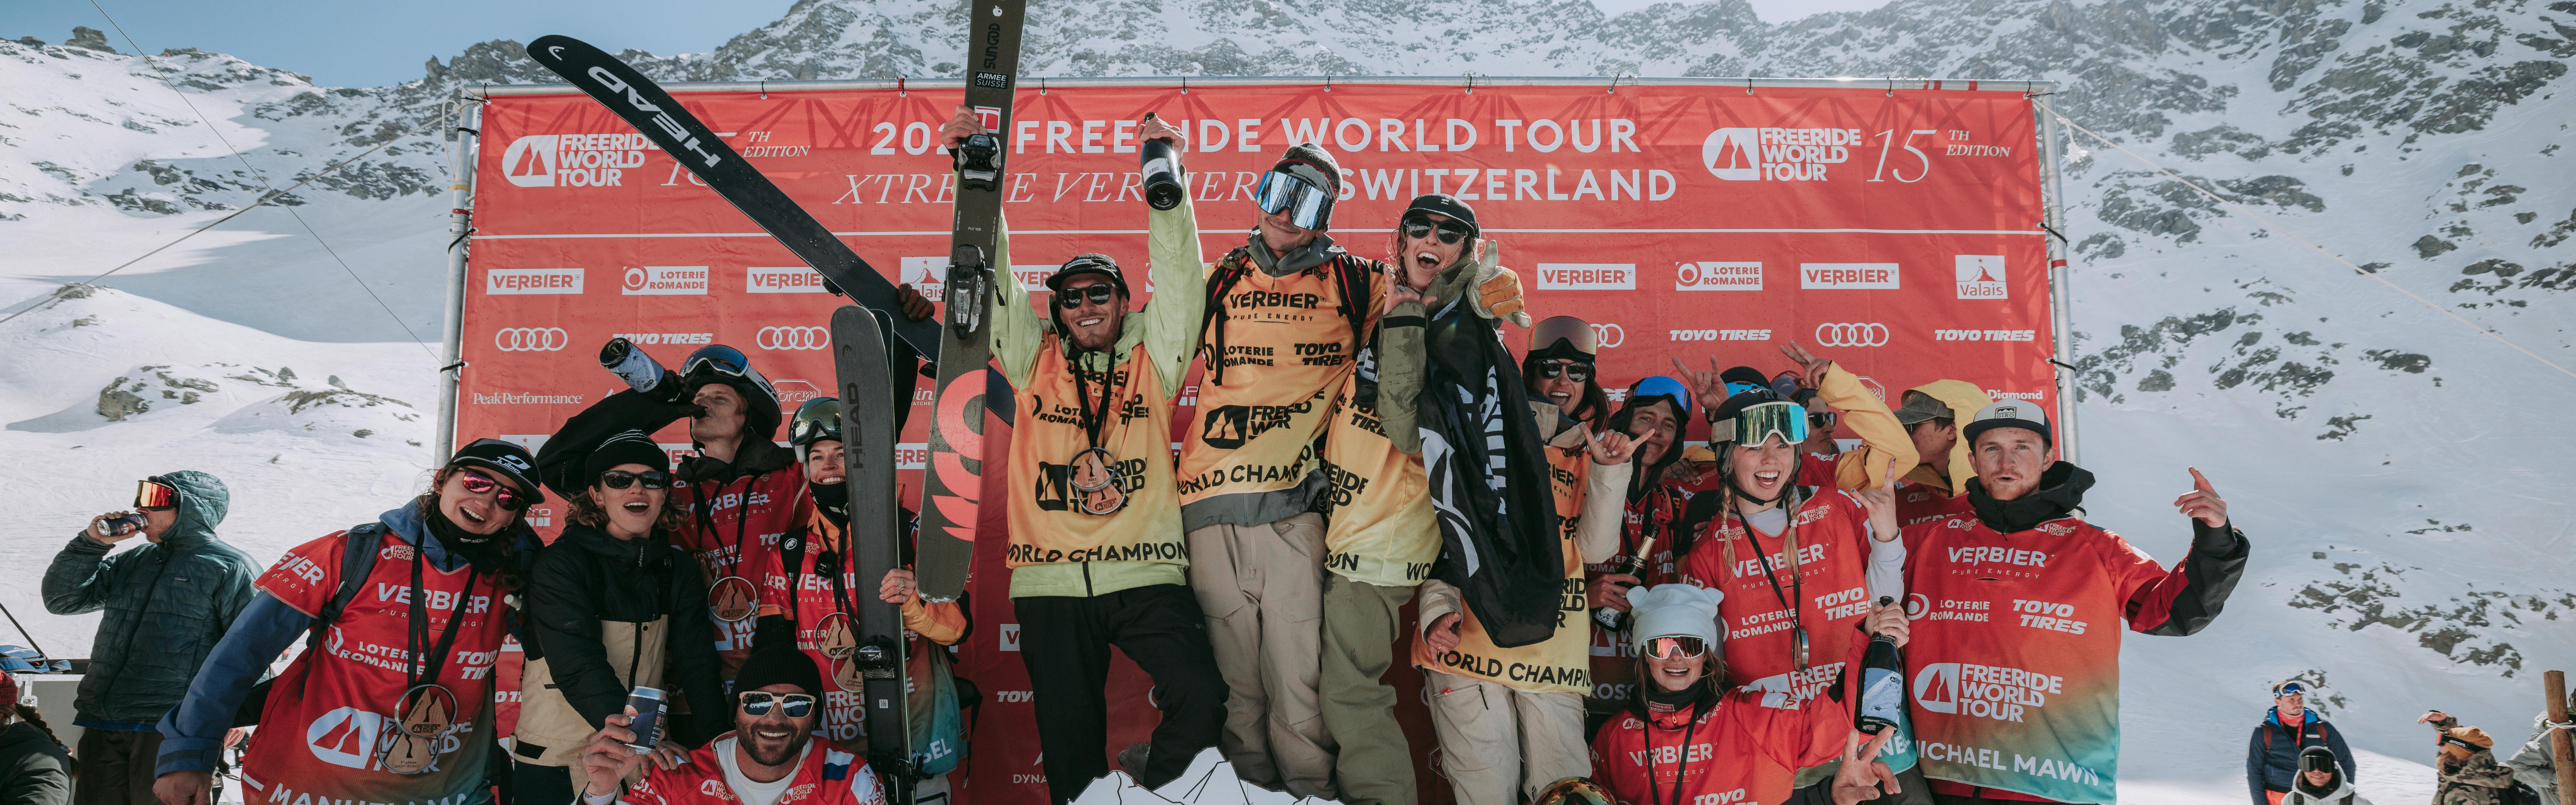 All the winners and athletes from Stop Five of the Freeride World Tour crowd on the podium and smile for the camera.